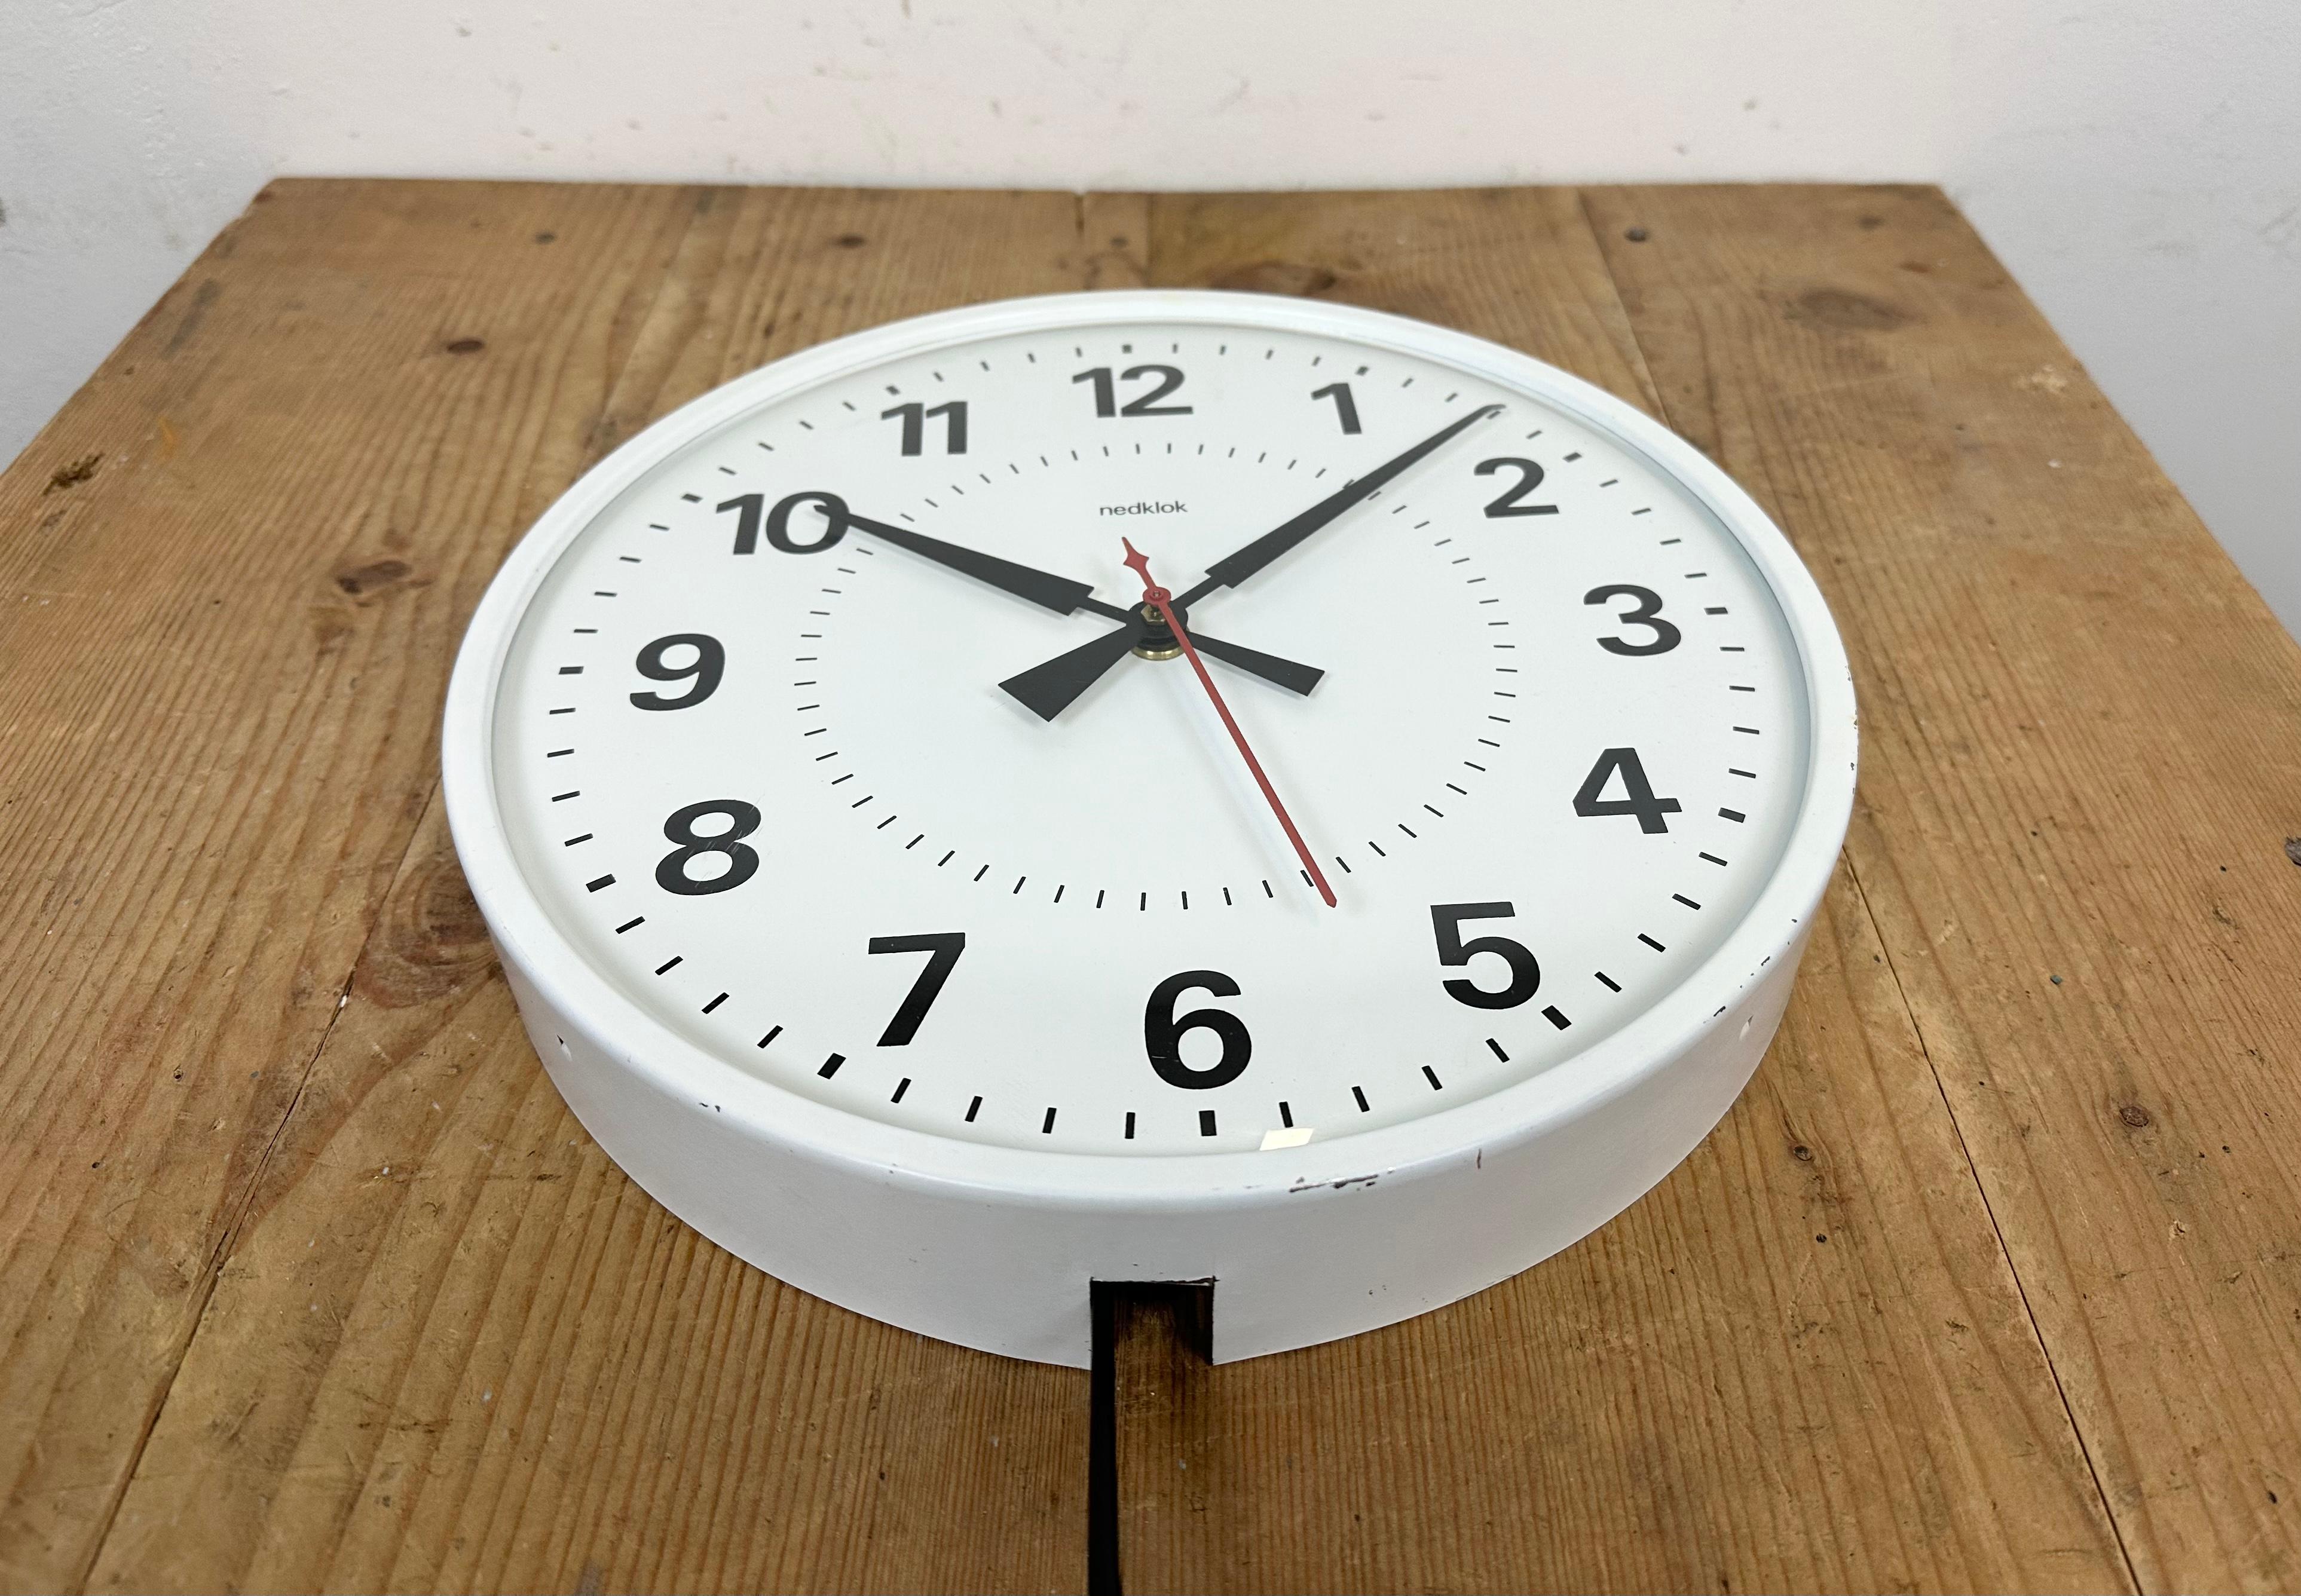 Vintage White Electric Station Wall Clock from Nedklok, 1970s For Sale 1